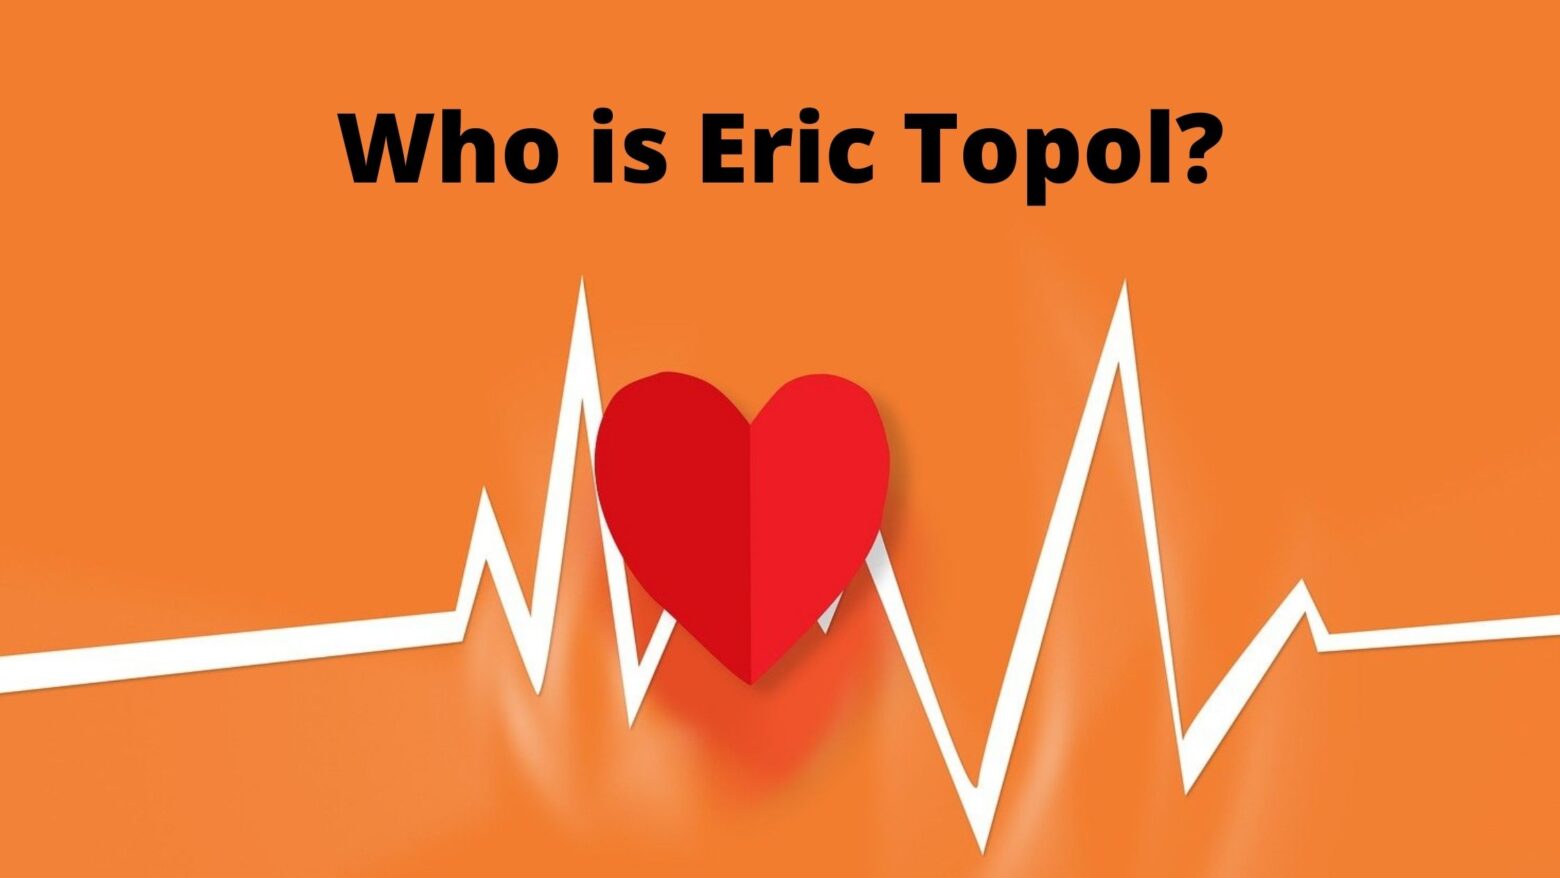 Who is Eric Topol?